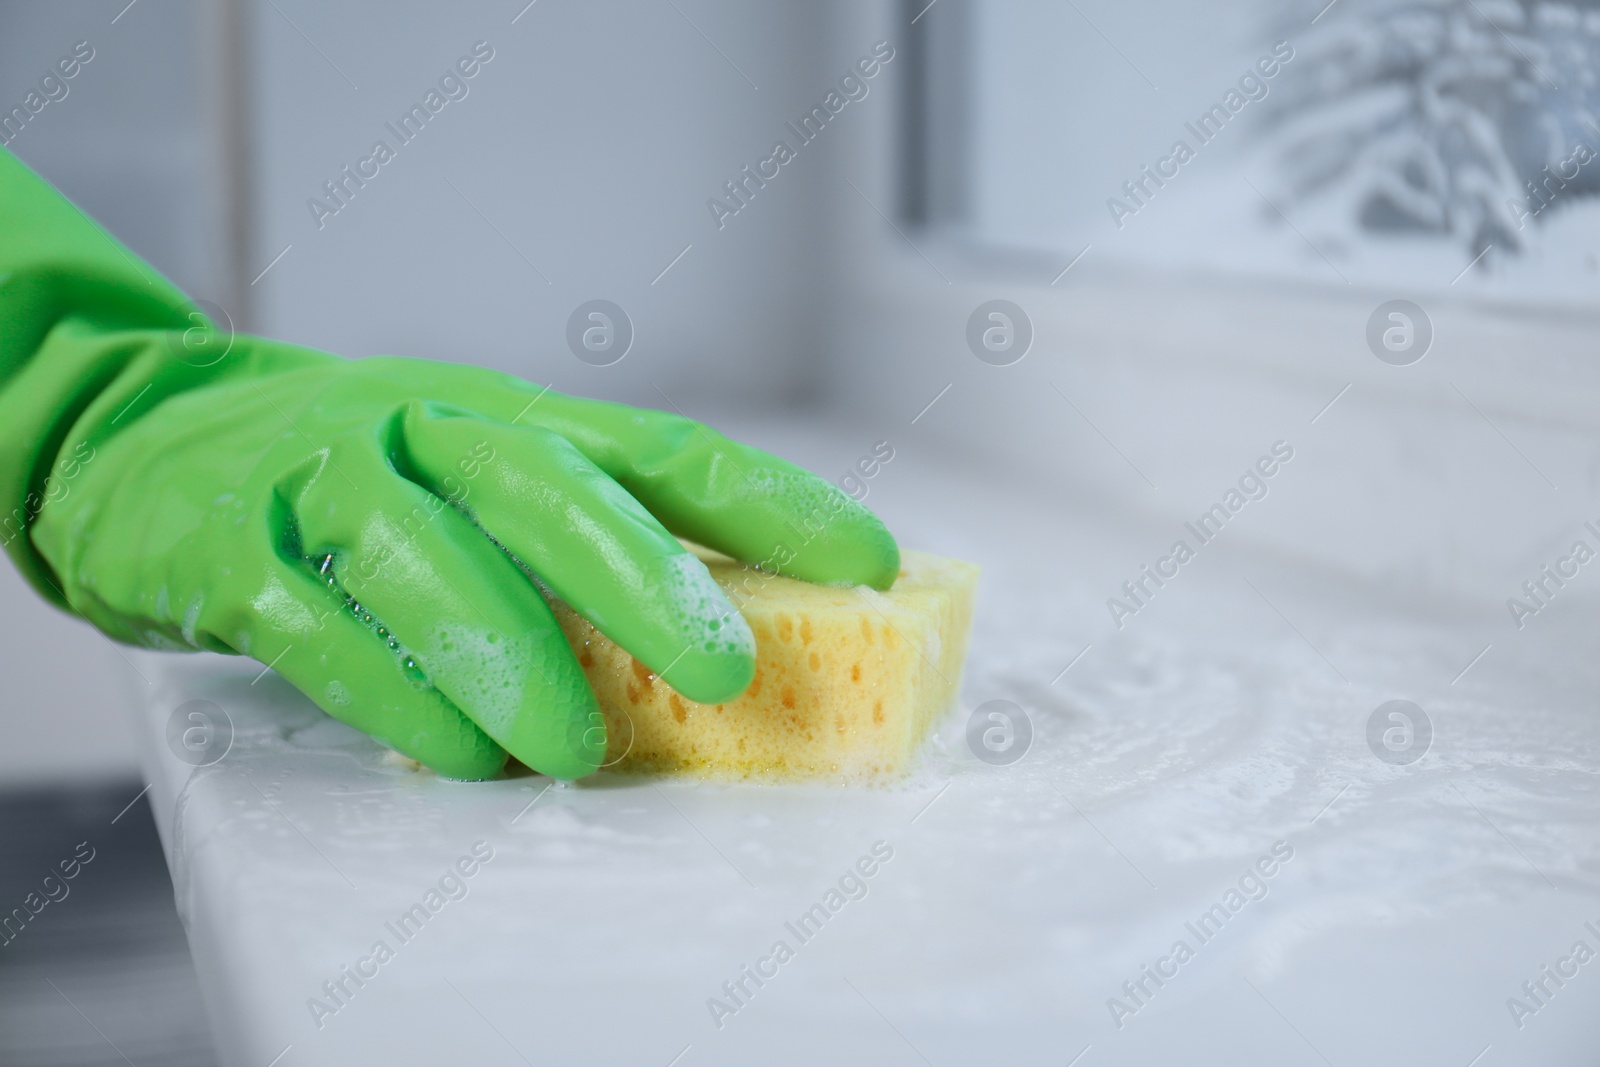 Photo of Woman cleaning window sill with sponge indoors, closeup